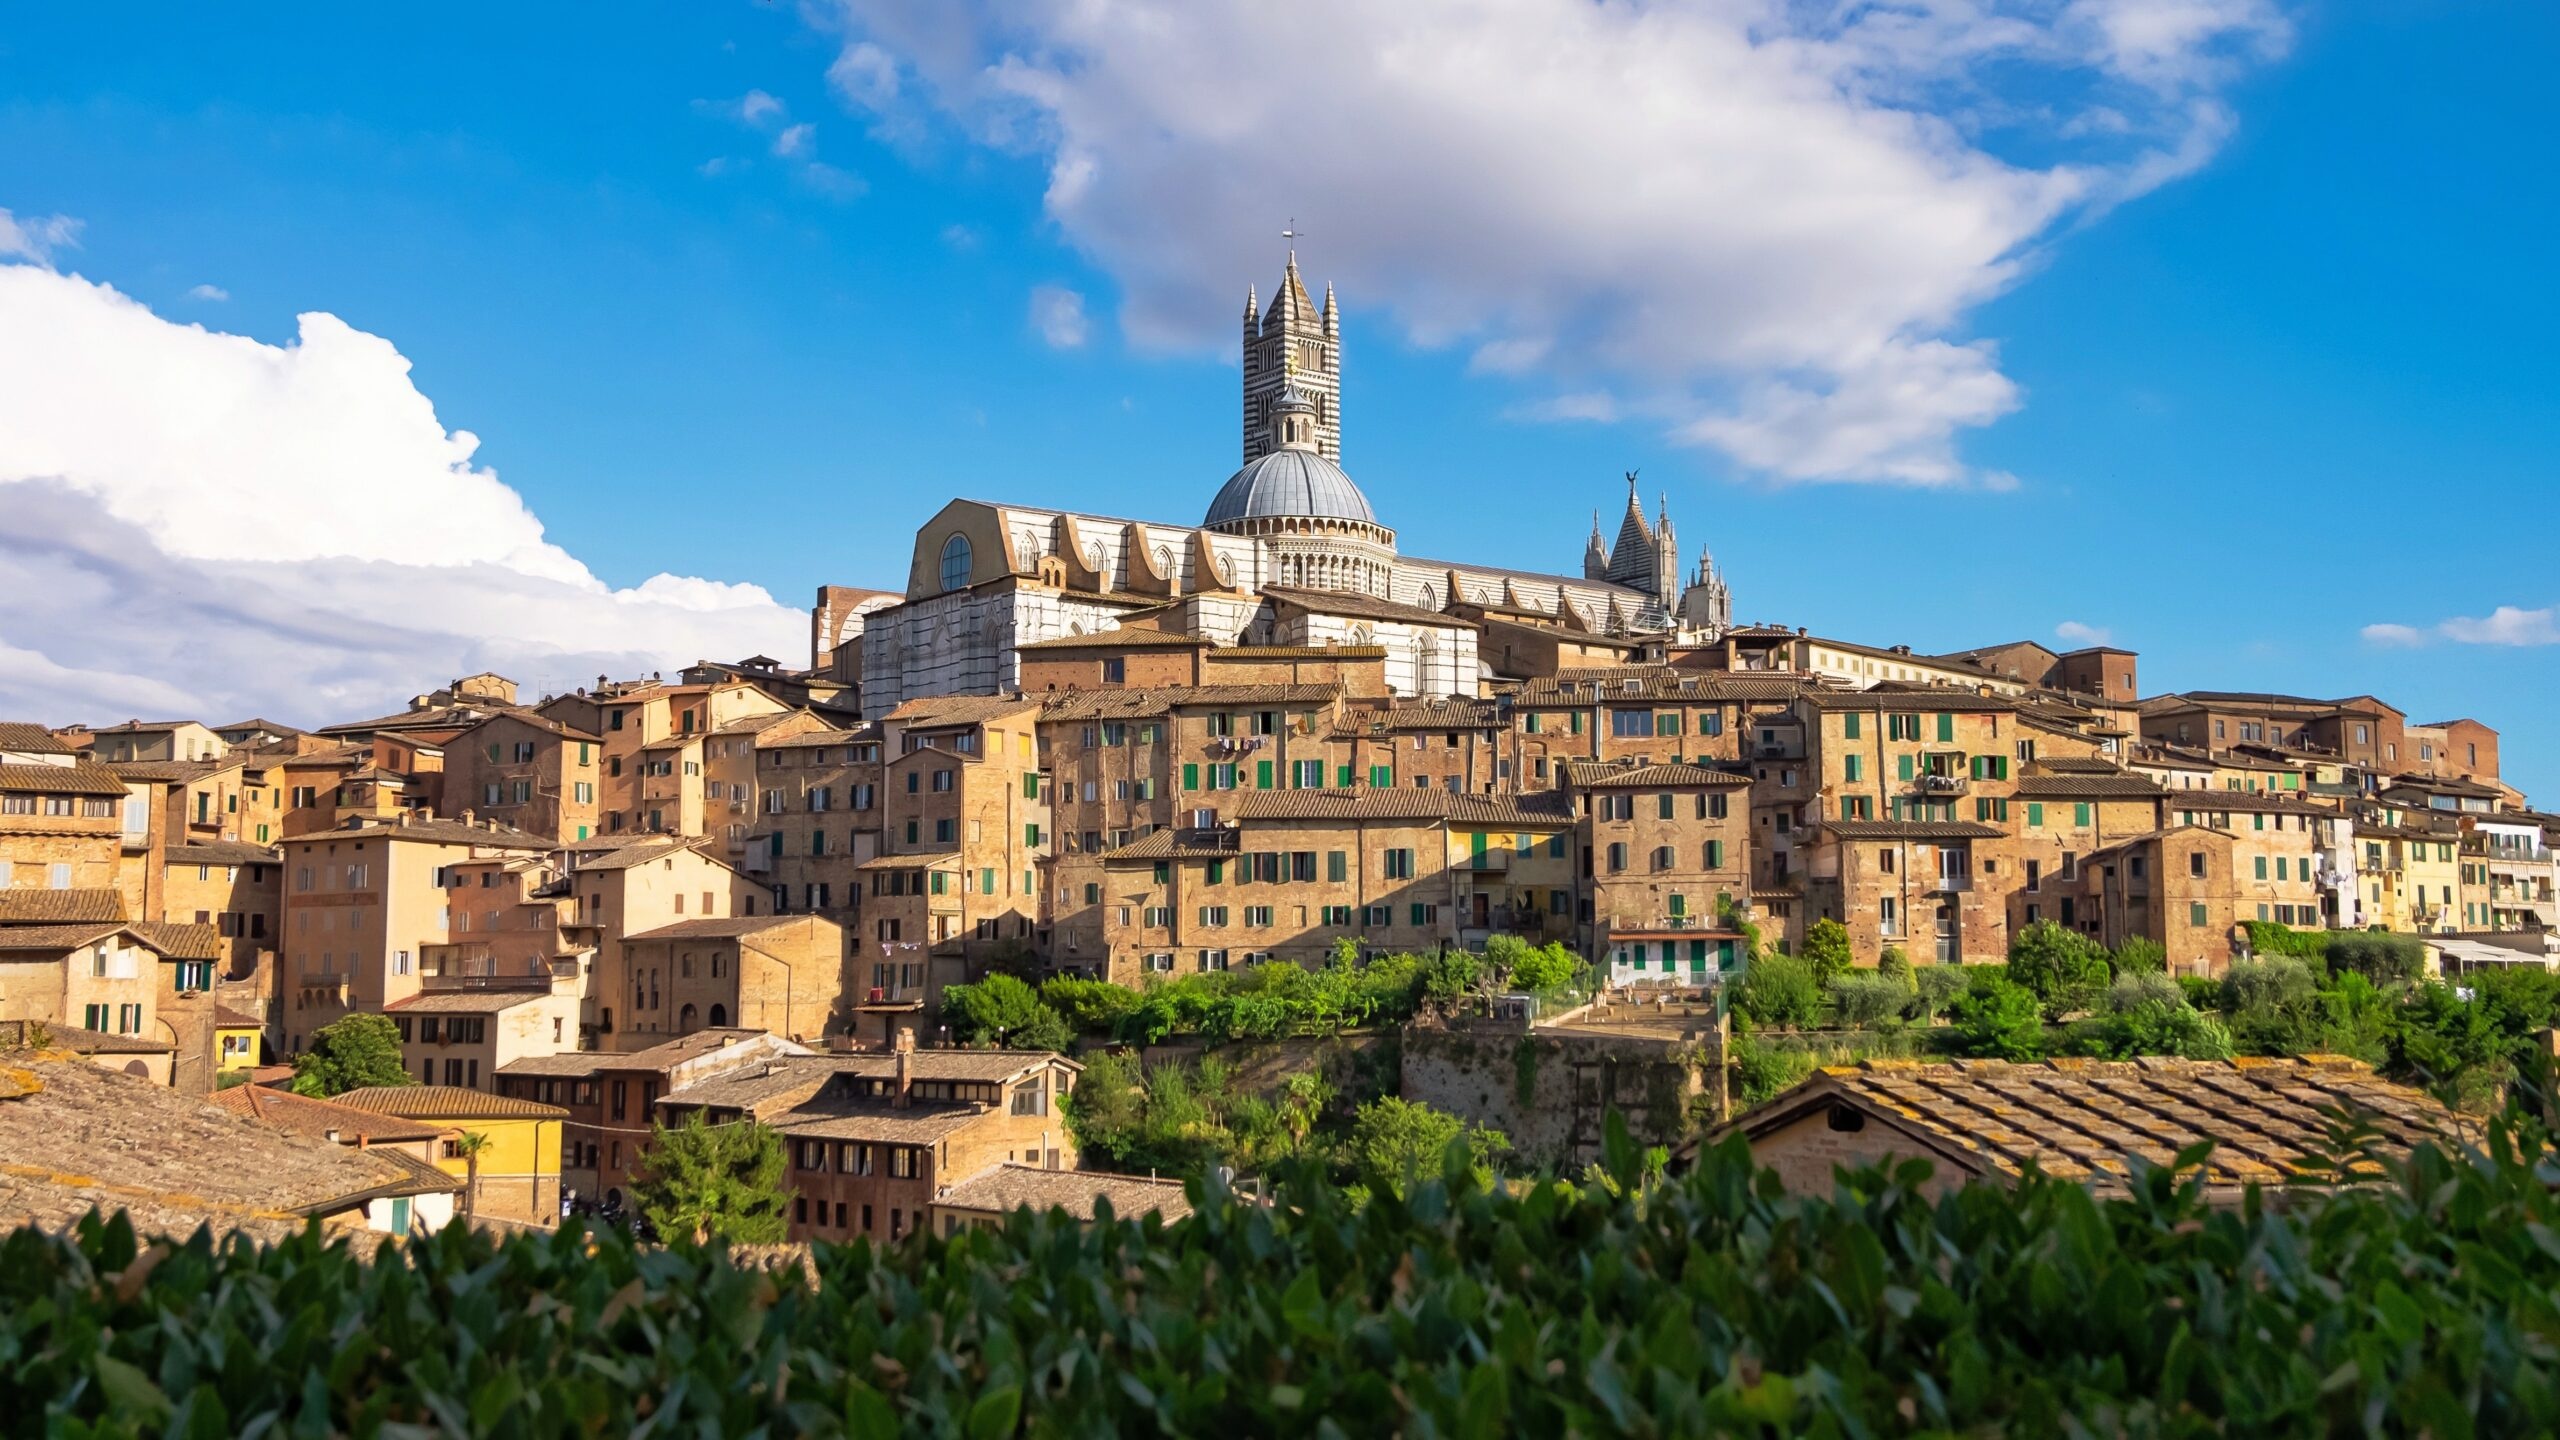 Best tours from Siena, Tourist journey, Guided experiences, Sightseeing, 2560x1440 HD Desktop